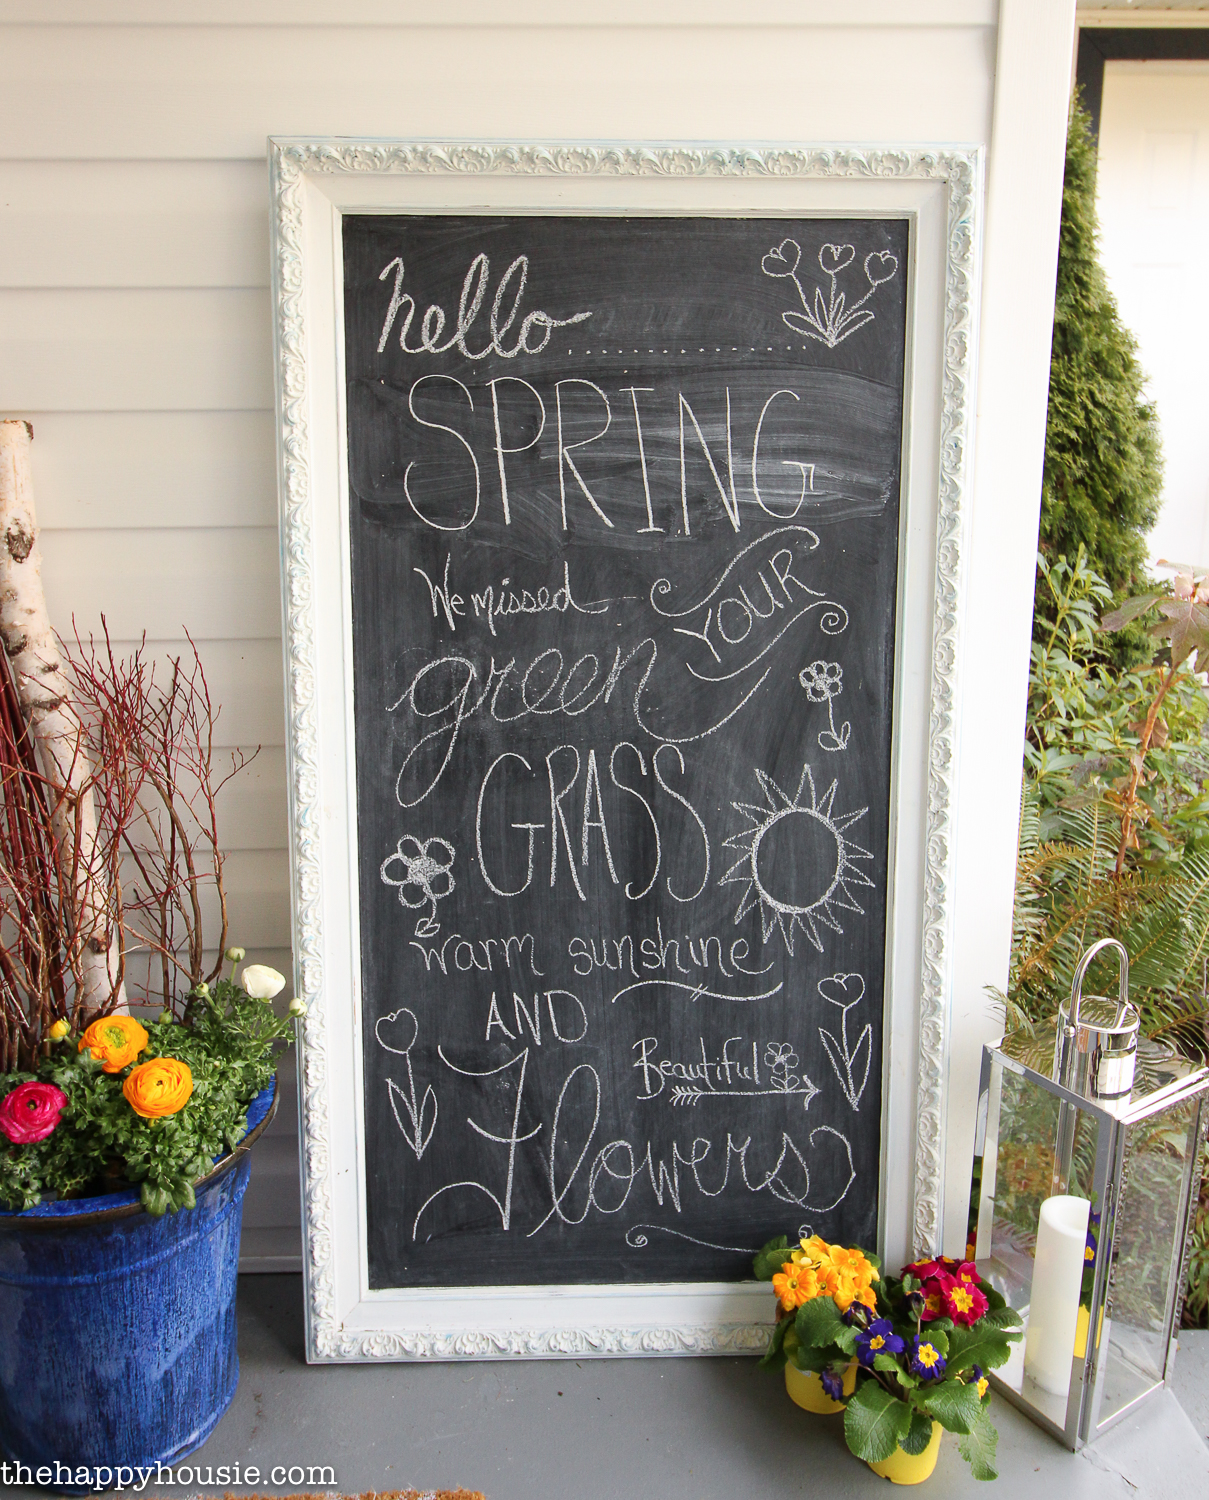 There are pots of flowers by the chalkboard on the porch.